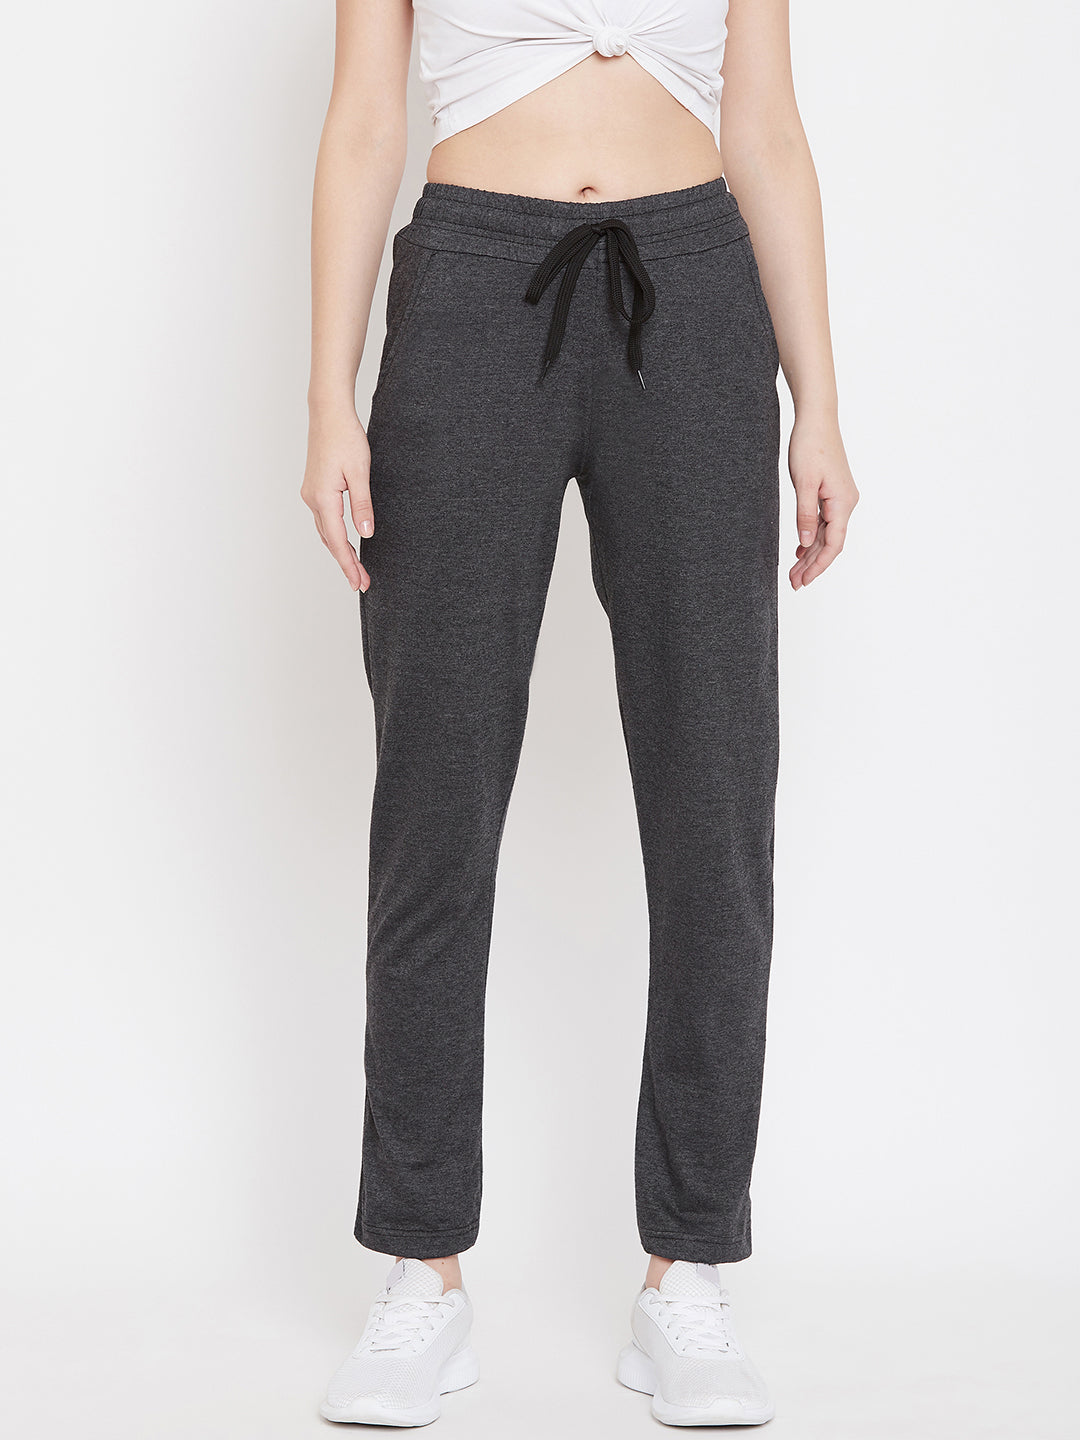 Women's Pack of 2 Track Pants-Navy and Dark Grey